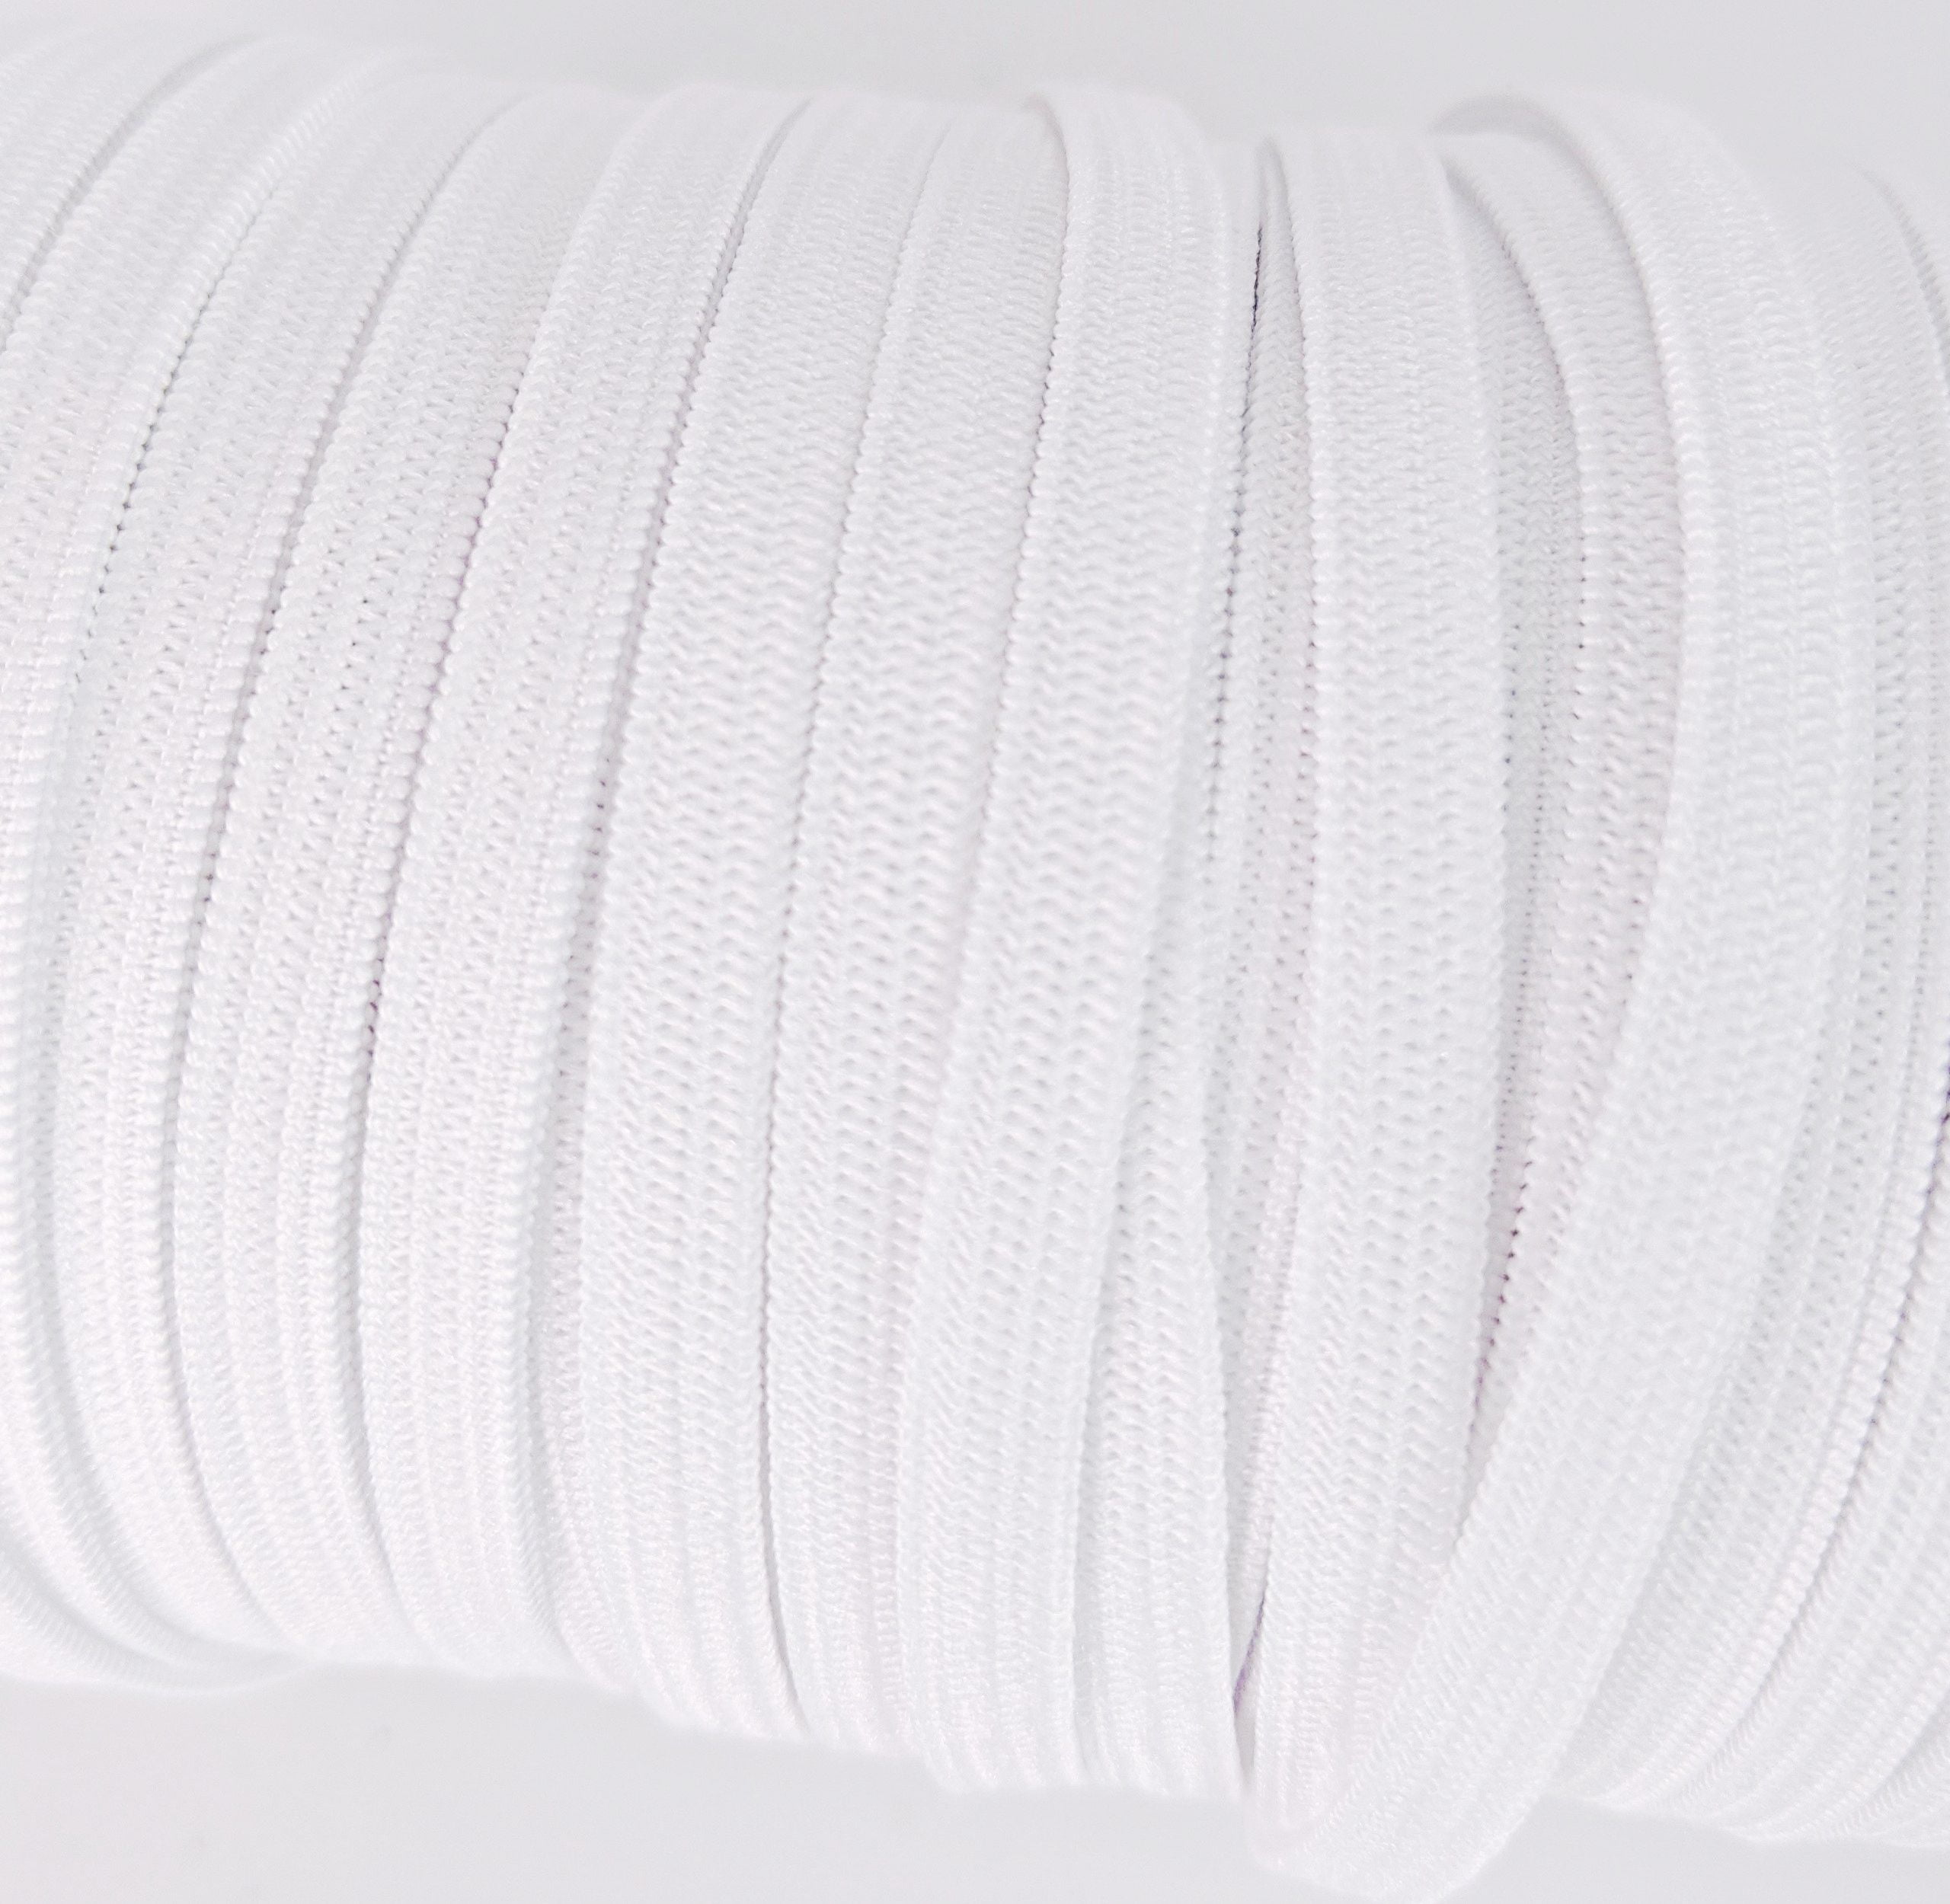 Knitting 1//8 inch Elastic White 10 Metres-3mm Elastic Corded Flat Cord Thin Elastic Dressmaking Waistband Headbands for Sewing Clothing Skirt /& Trouser Waistband DIY Projects